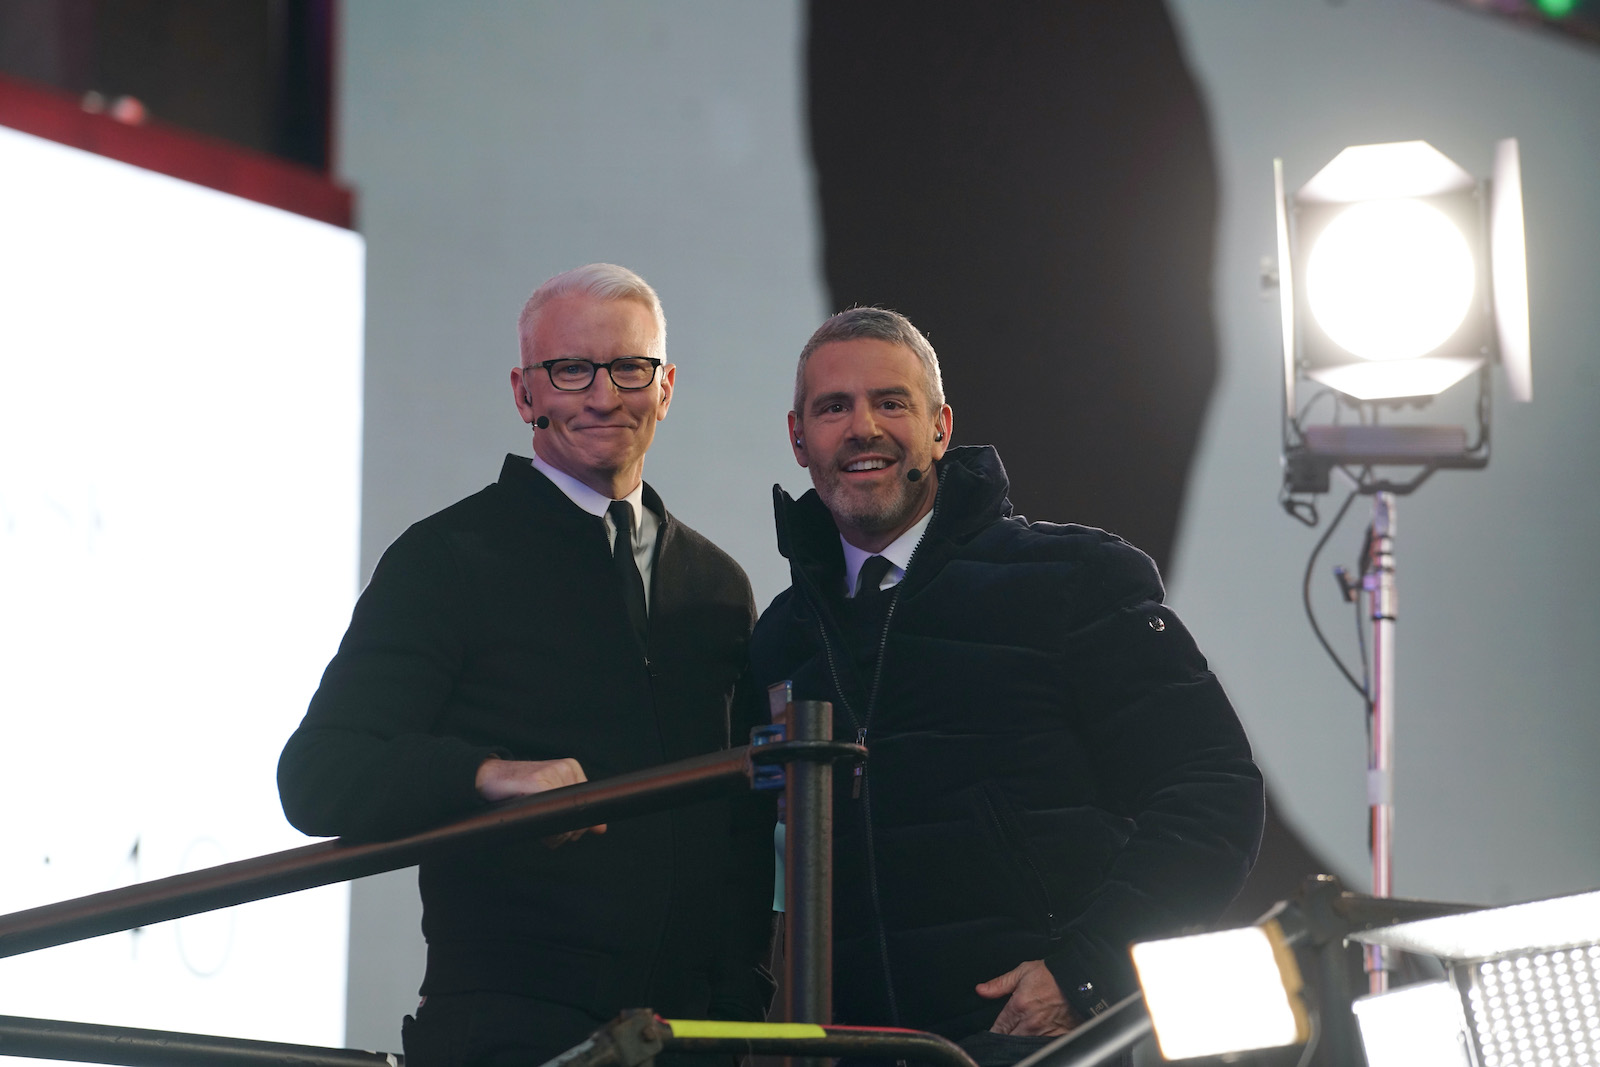 Anderson Cooper and Andy Cohen prepare for the Times Square New Year's Eve 2020 Celebration